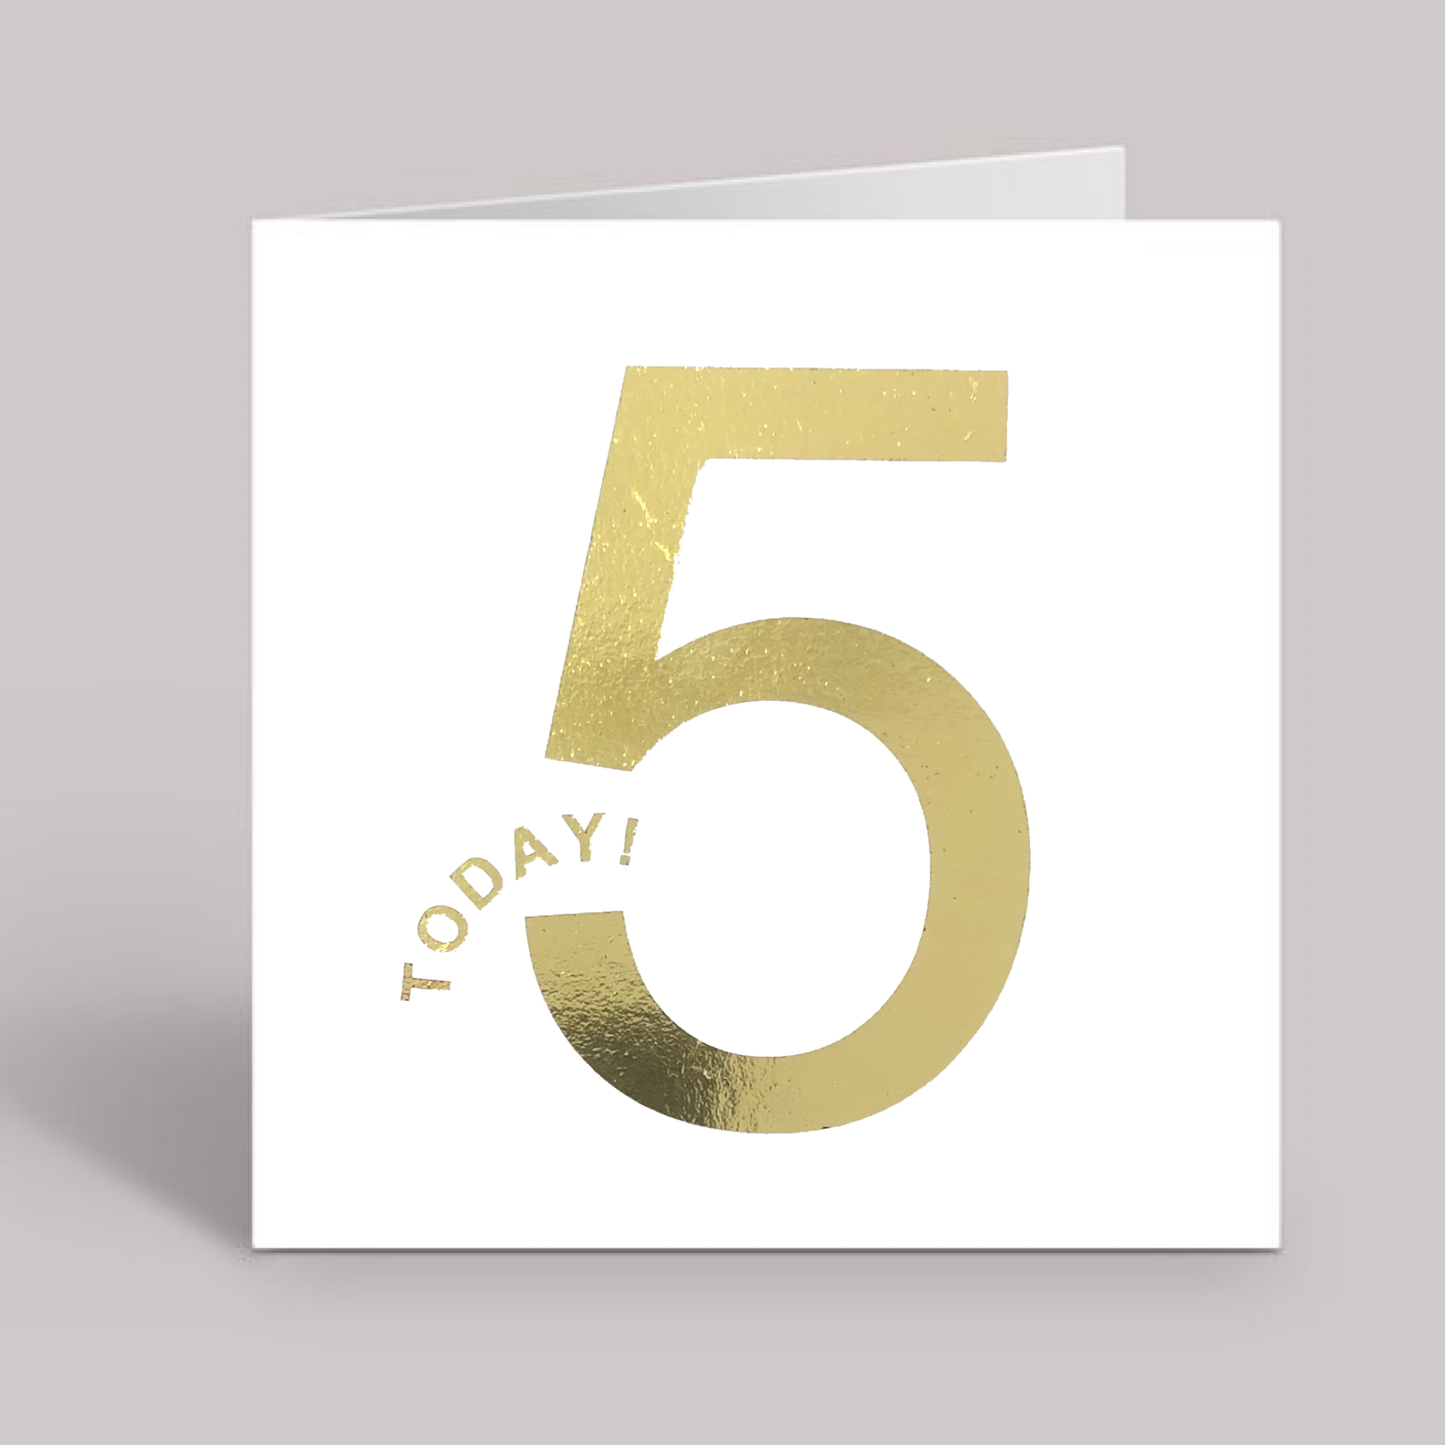 Gold Foil 5 Today! Card